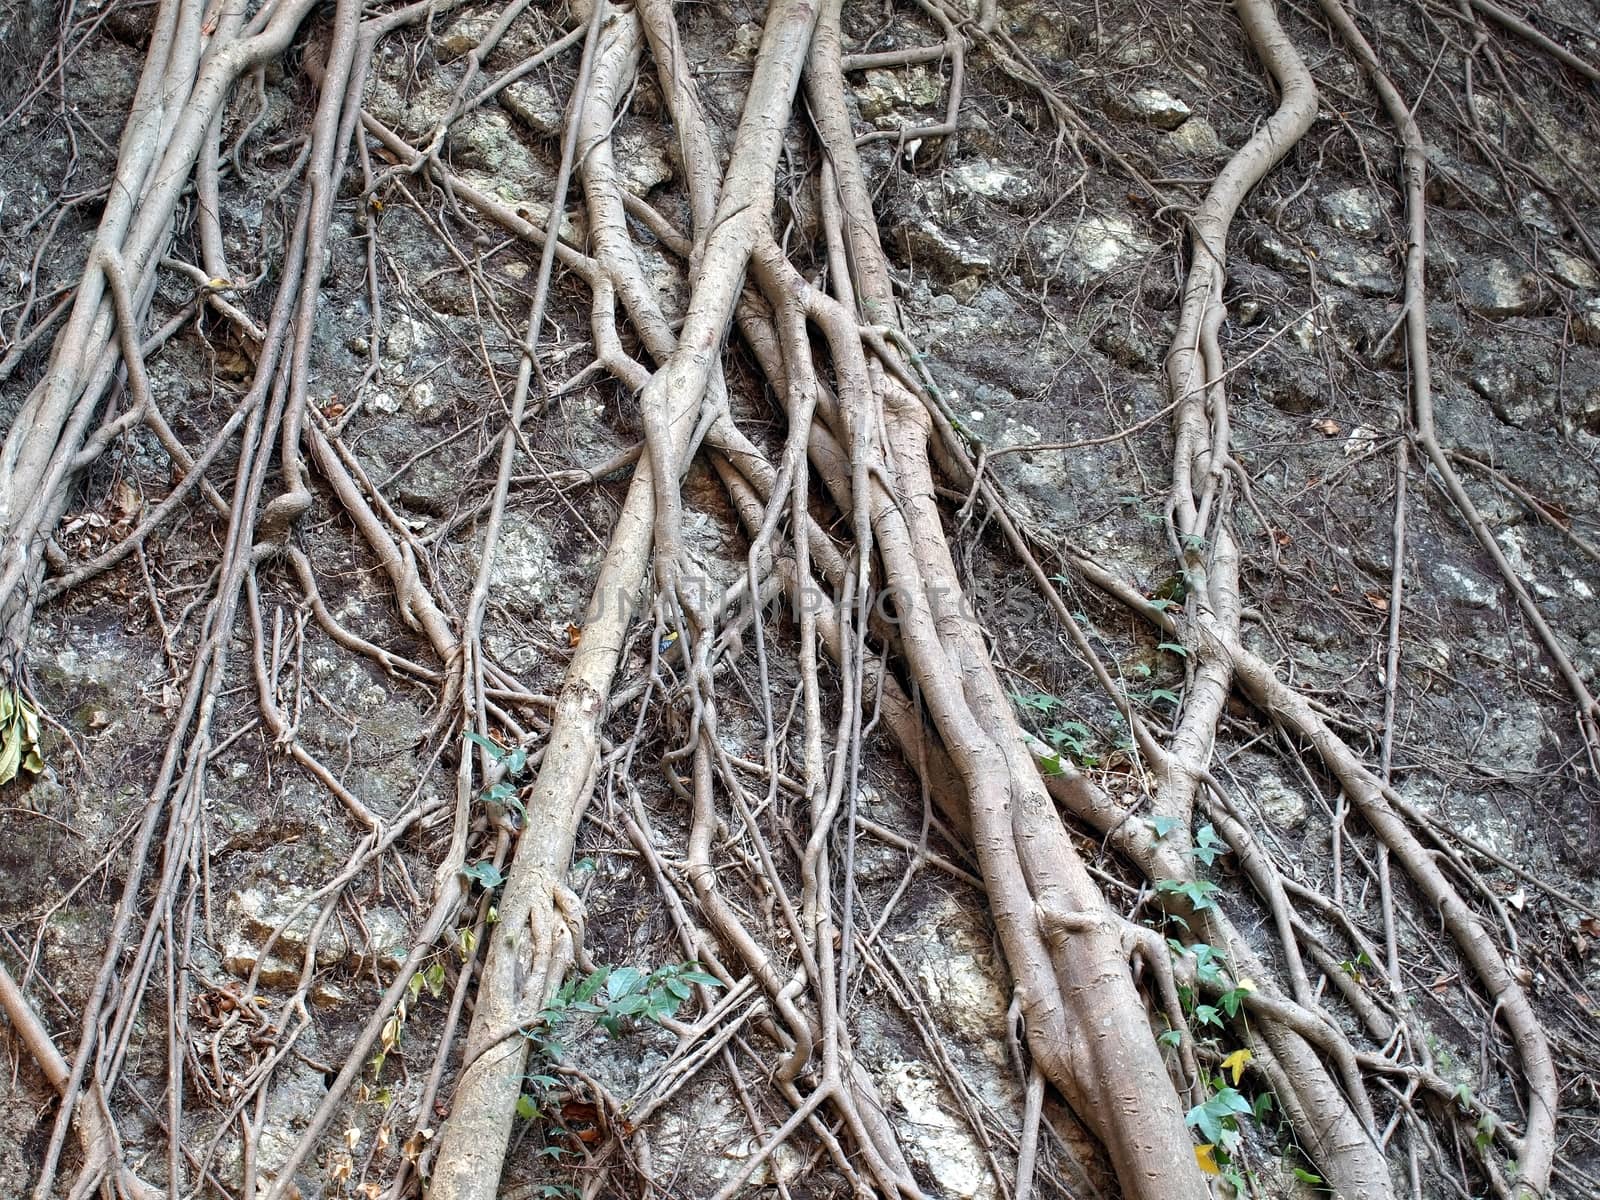 An intricate network of roots clings tightly to a rock surface
